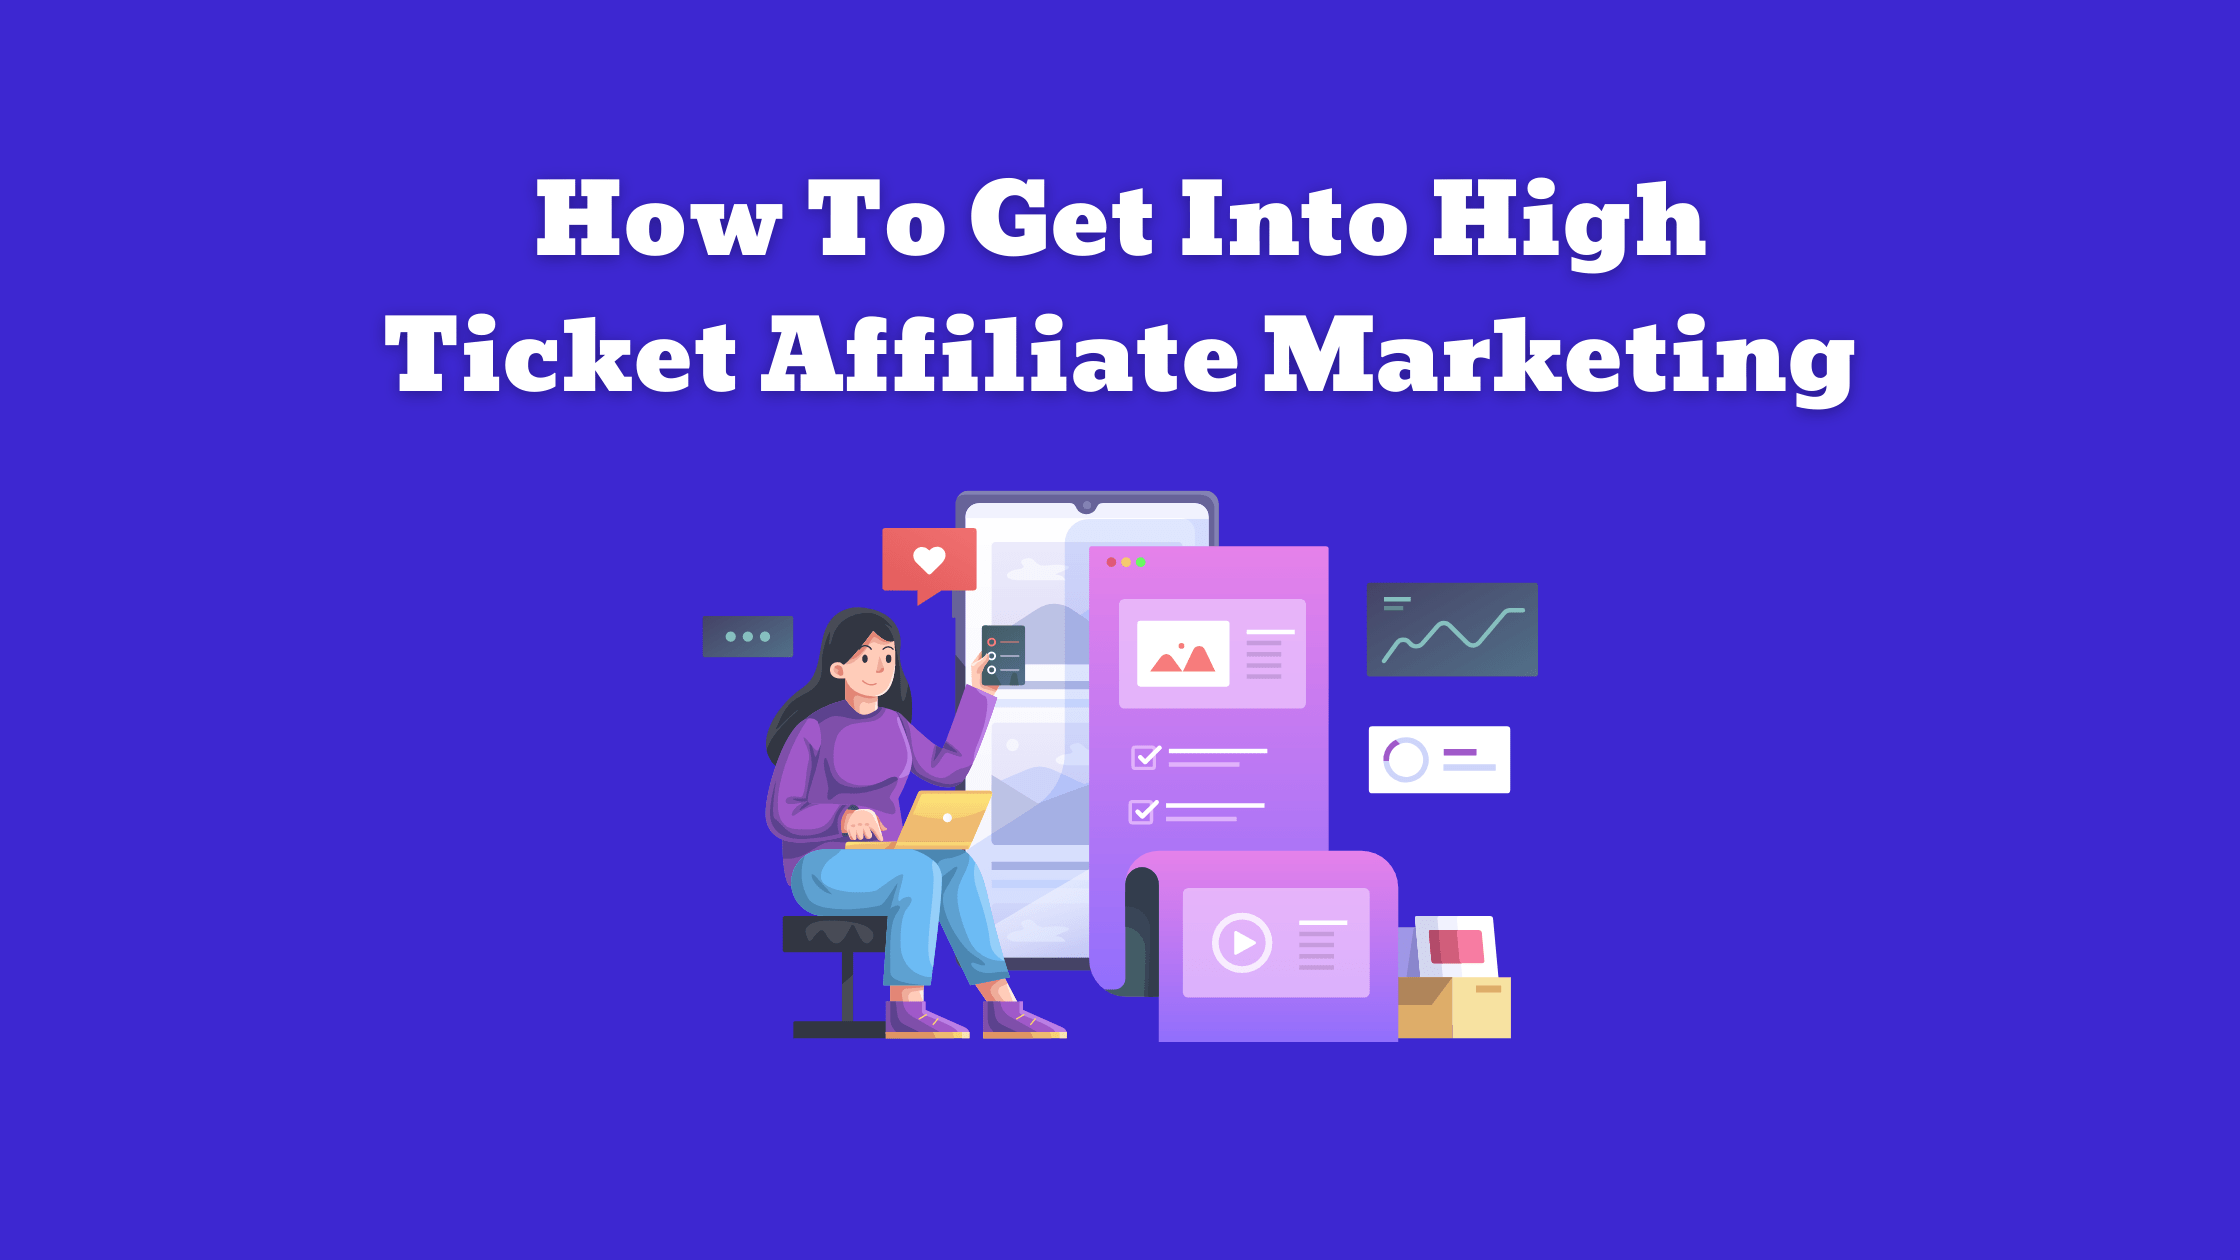 How to get into high ticket affiliate marketing